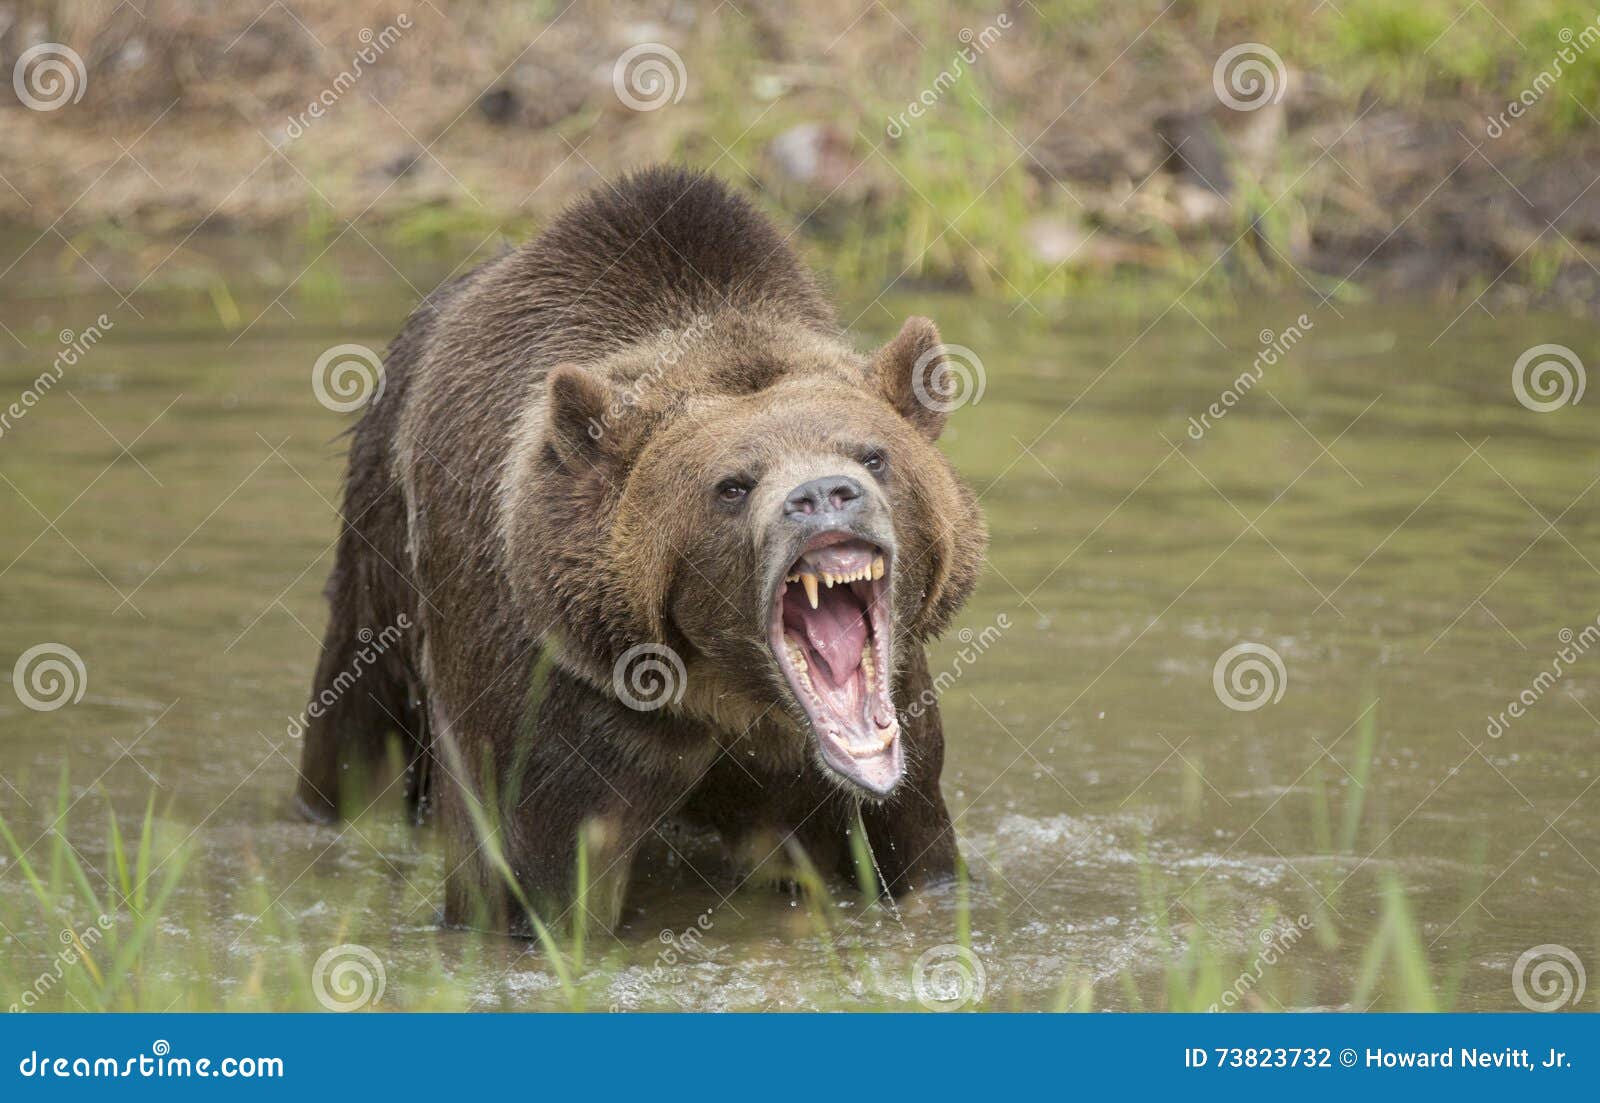 grizzly bear growling close up, head and shoulders.